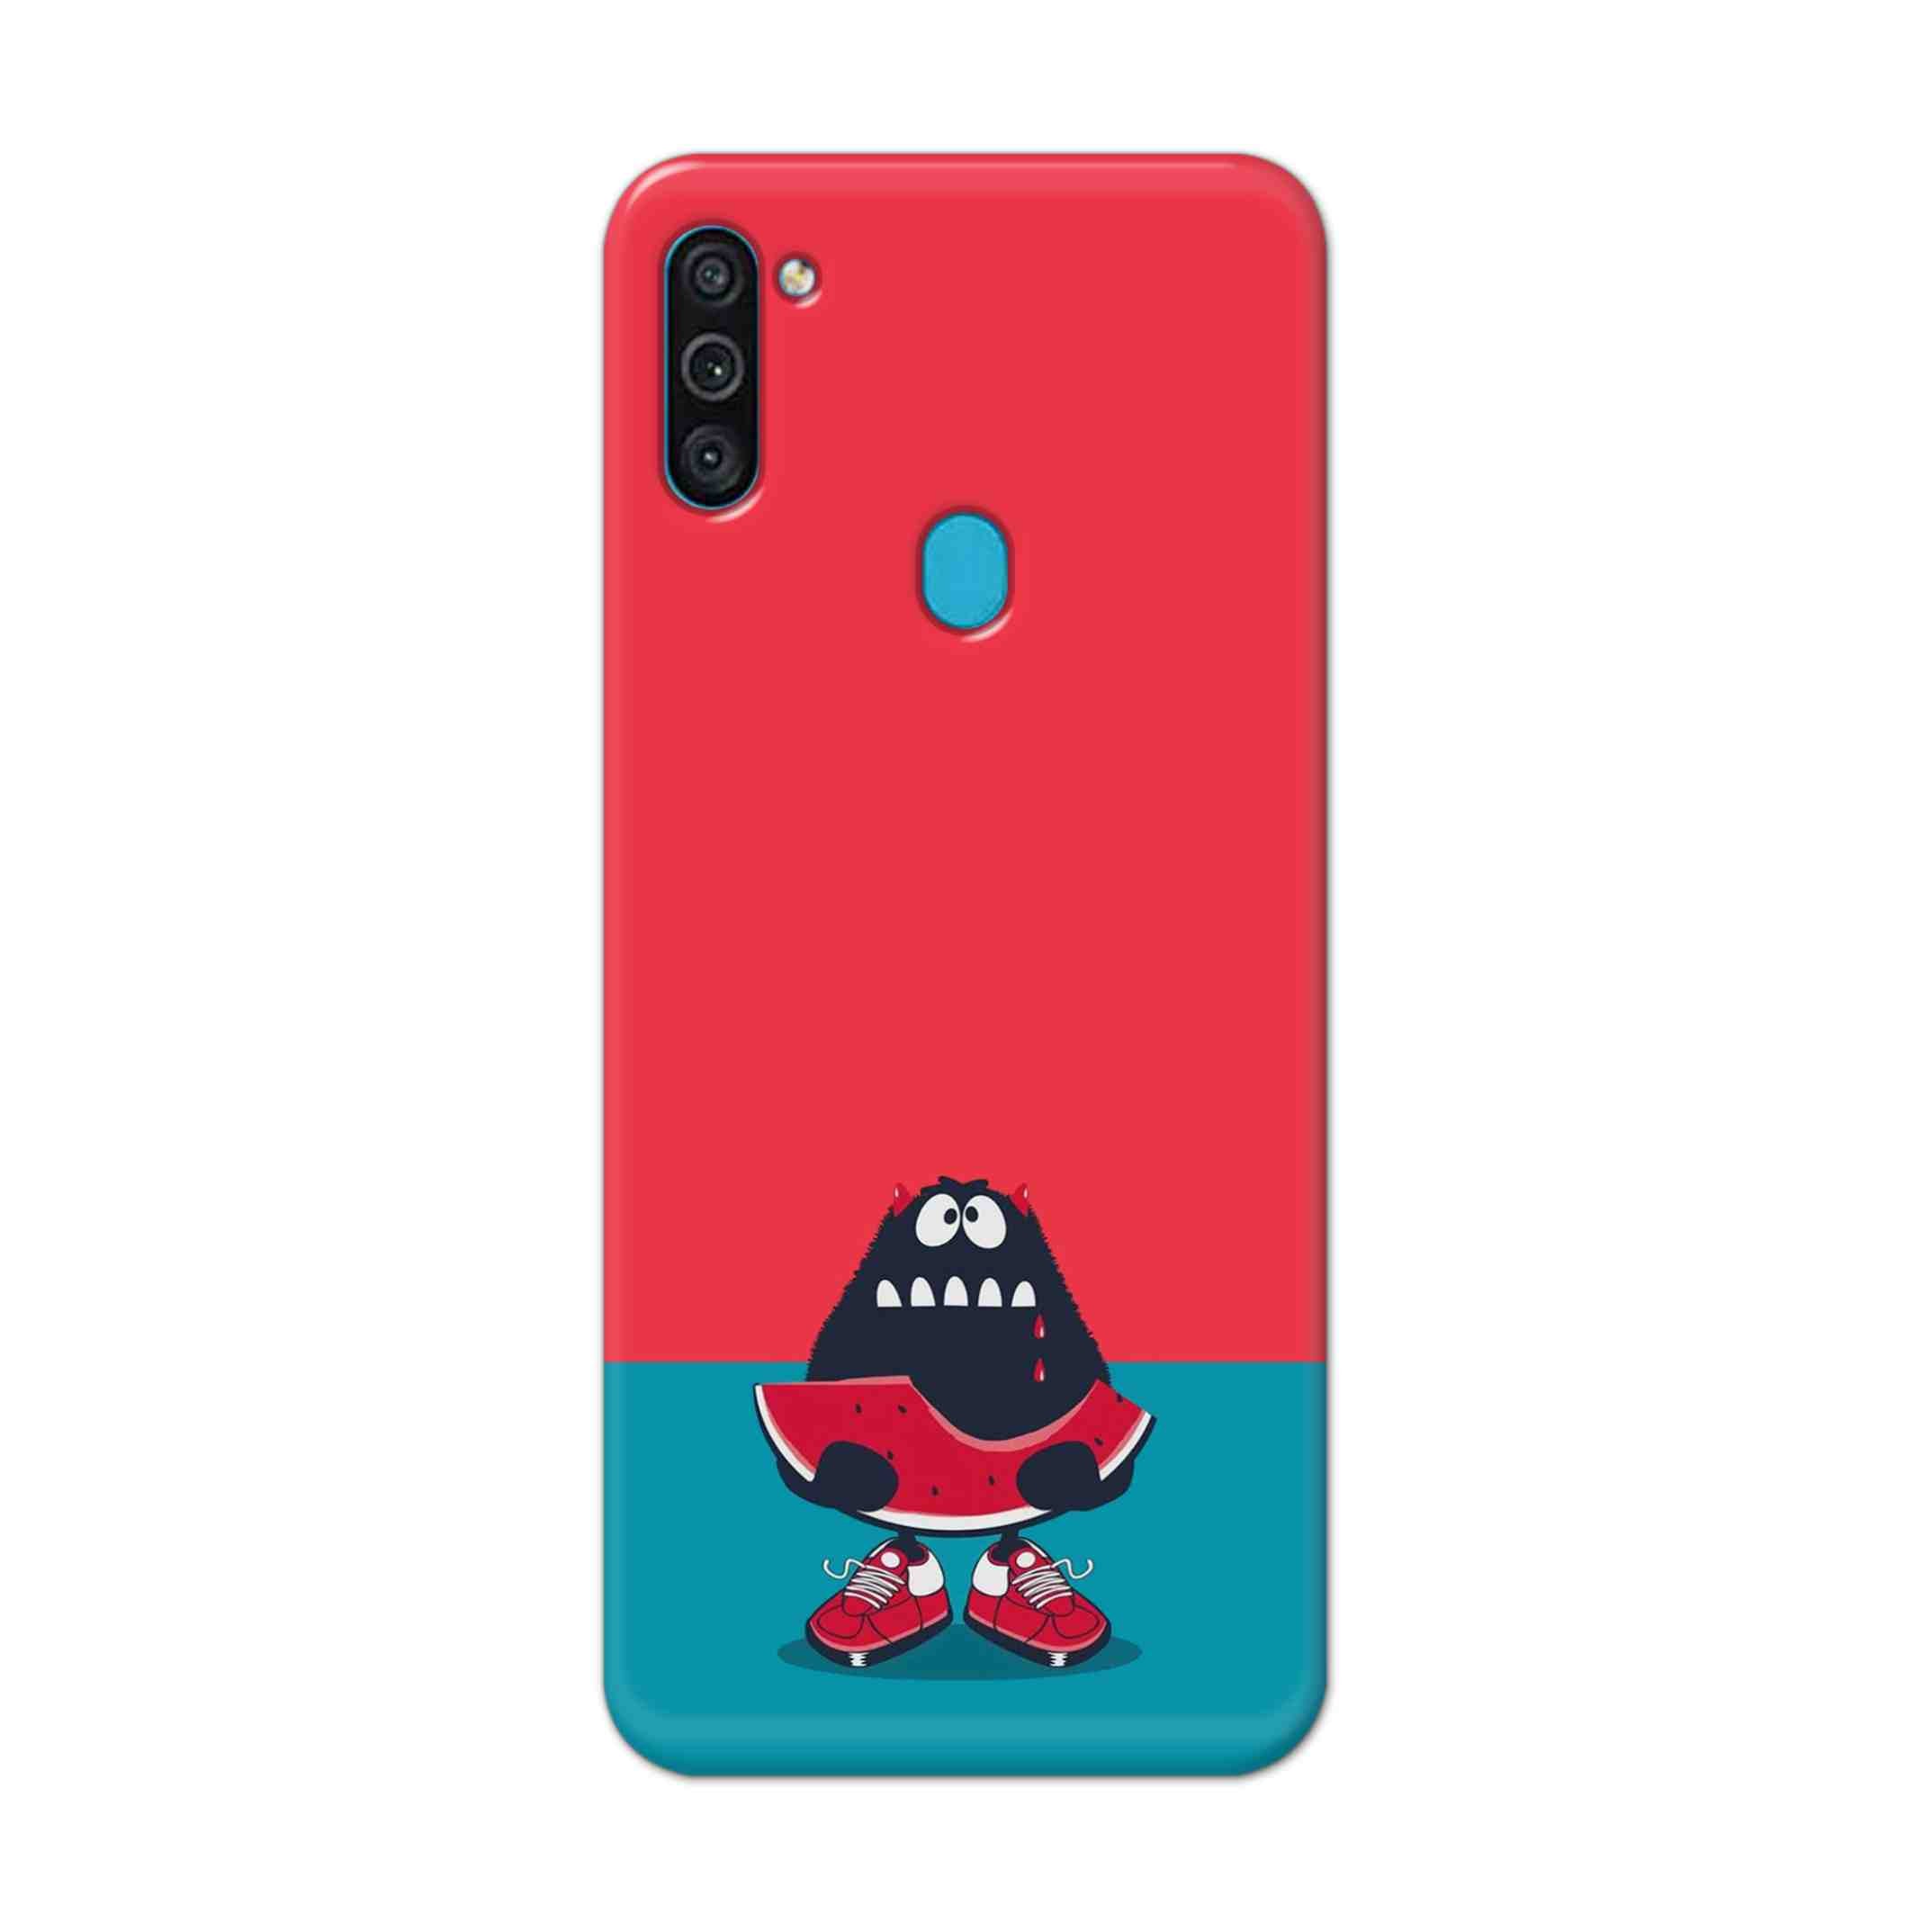 Buy Watermelon Hard Back Mobile Phone Case Cover For Samsung Galaxy M11 Online